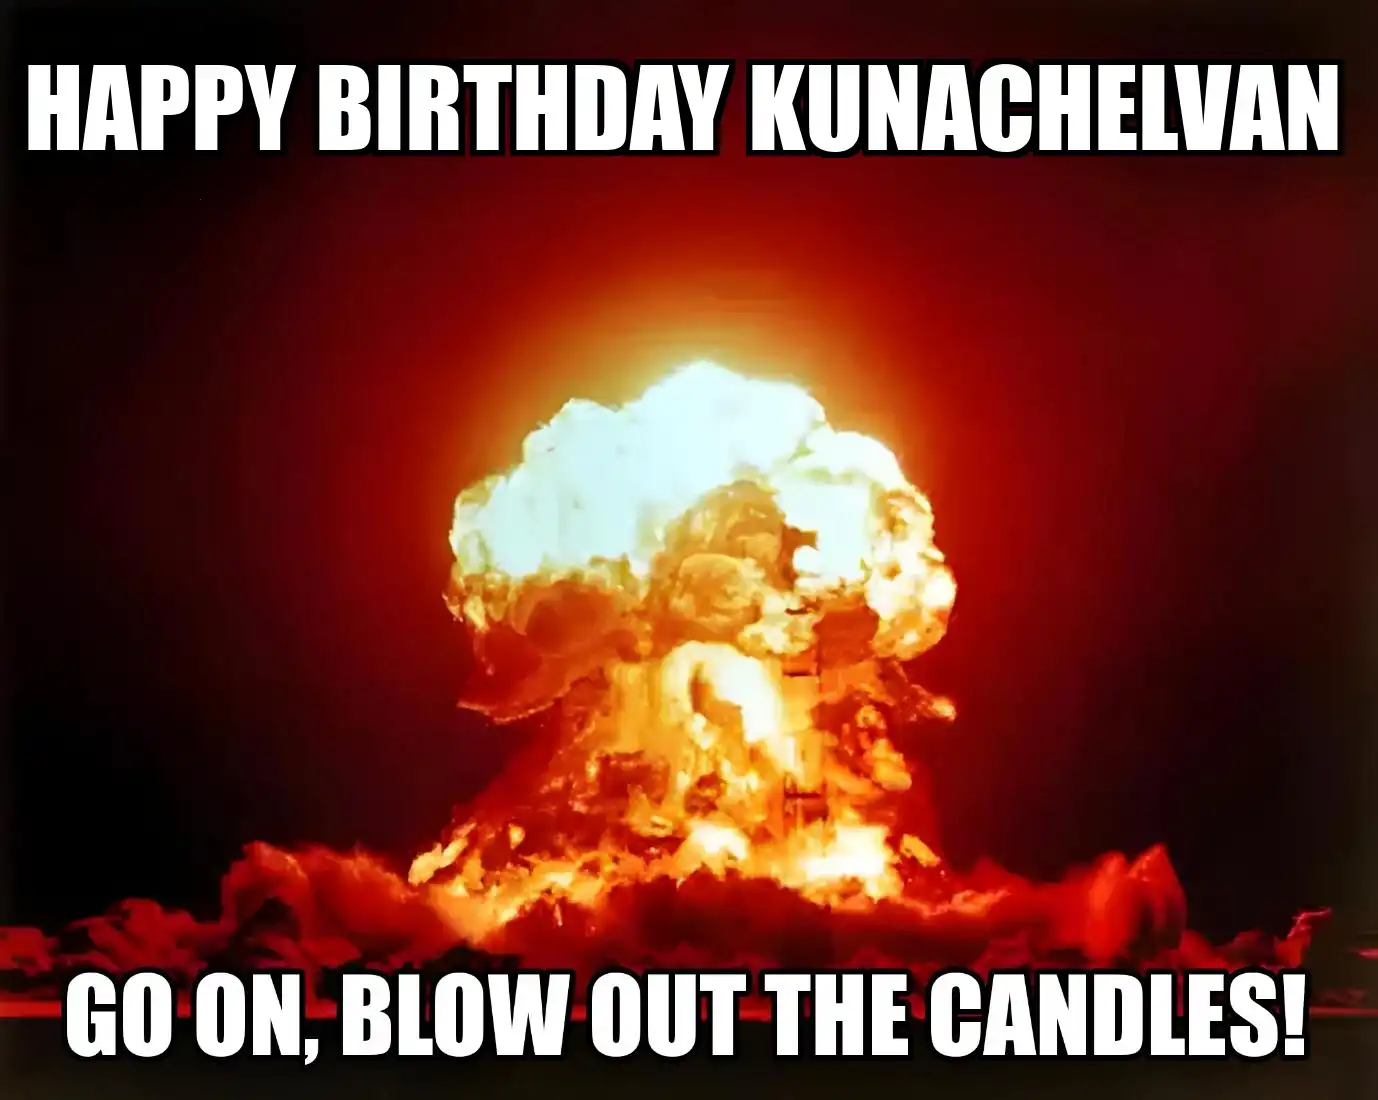 Happy Birthday Kunachelvan Go On Blow Out The Candles Meme